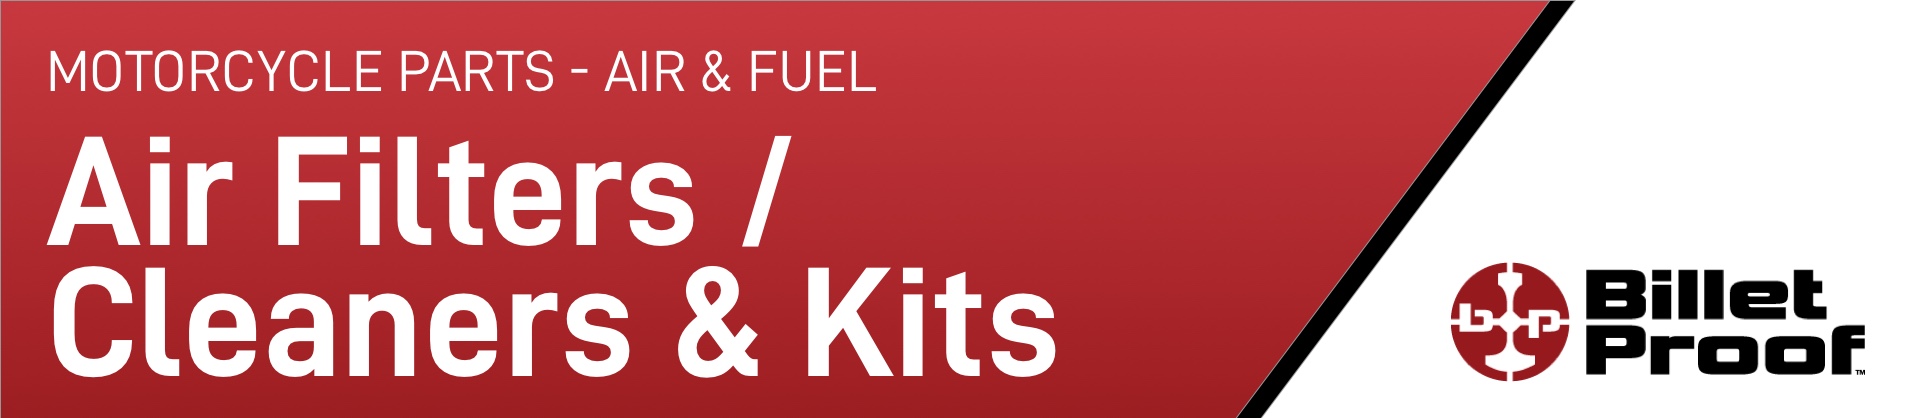 motorcycle-parts-air-and-fuel-air-filters-cleaners-and-kits.jpg